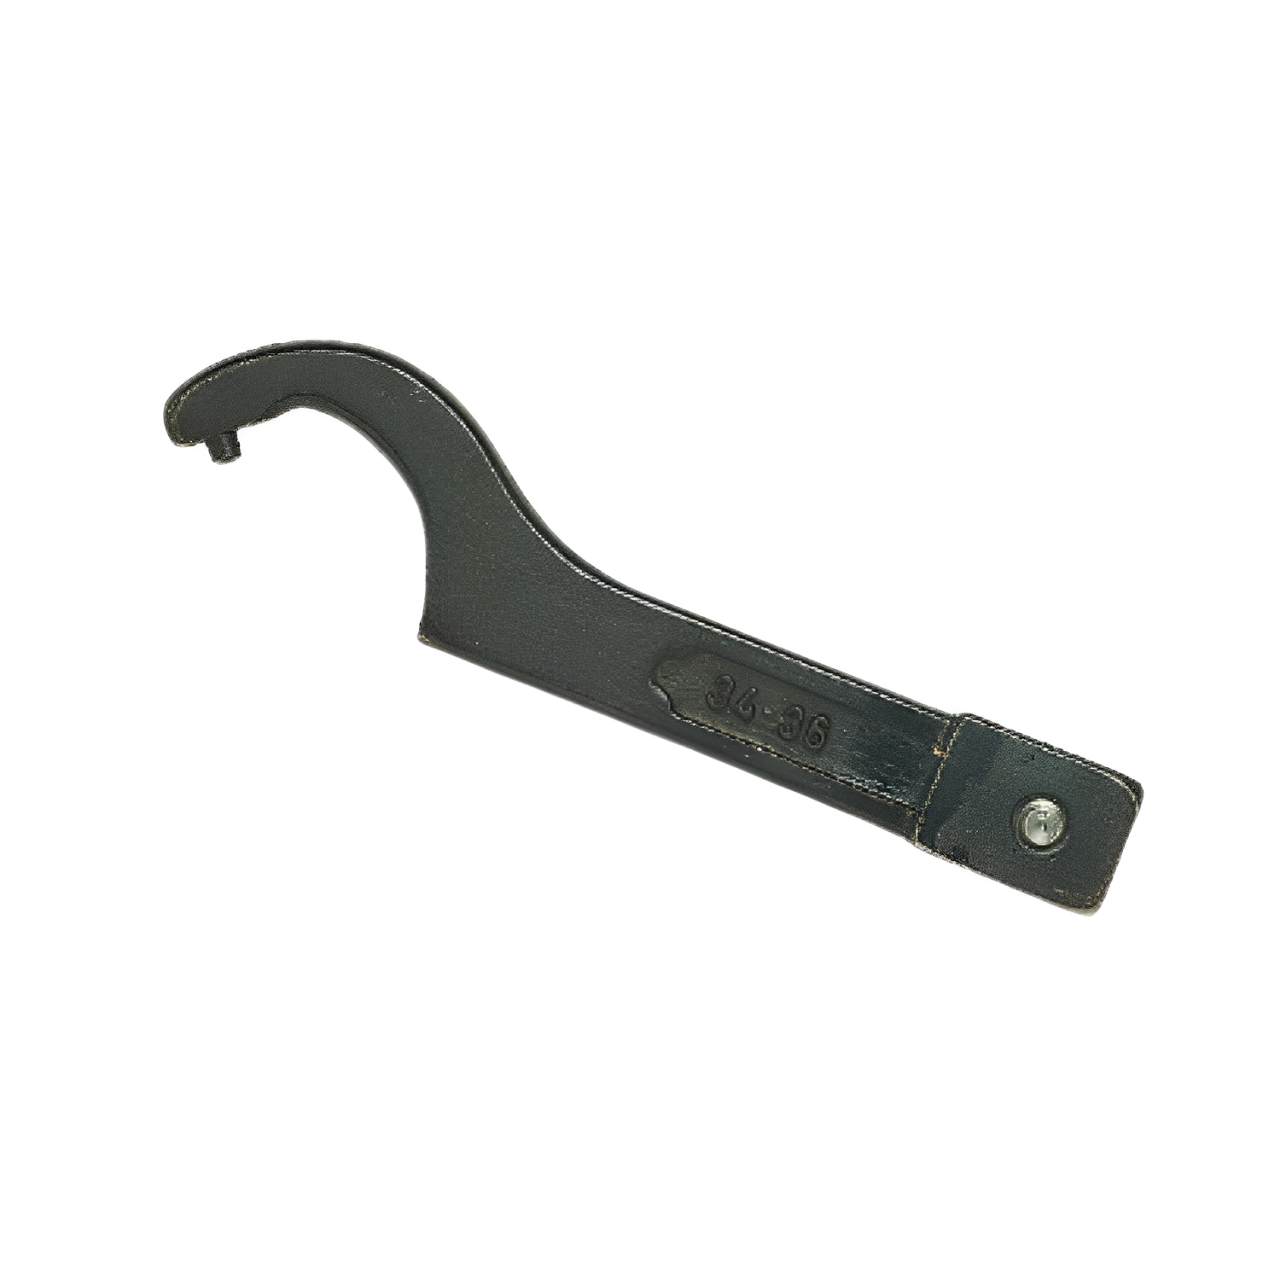 TECNOGI 965.20 Hook Wrench Pin For Torque Wrench 16/20 Dimension - Premium Hook Wrench from TECNOGI - Shop now at Yew Aik.